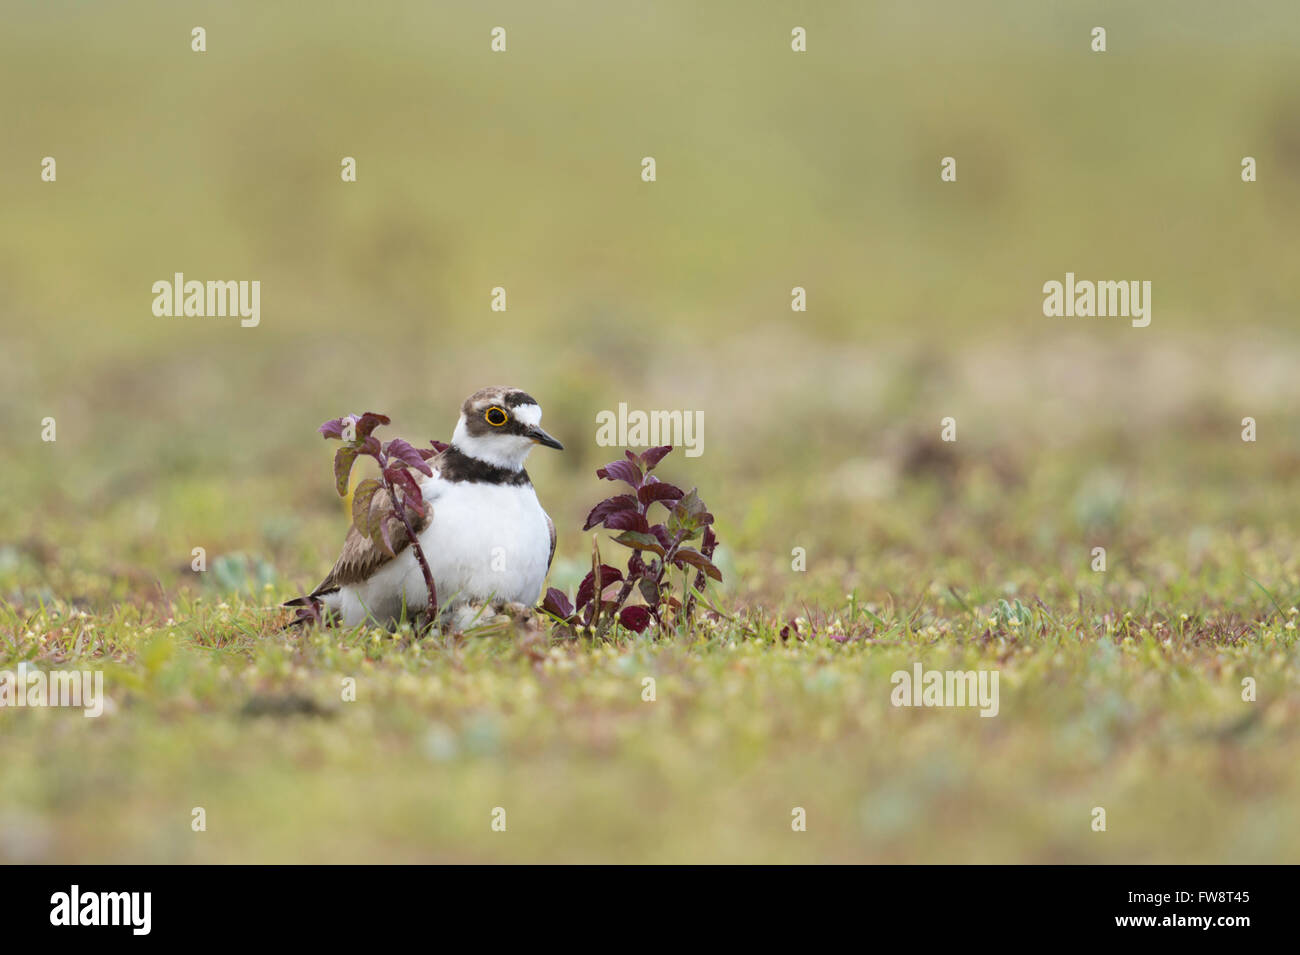 Little Ringed Plover ( Charadrius dubius ), adult wader bird in typical habitat, warming up a hatchling under its belly plumage. Stock Photo